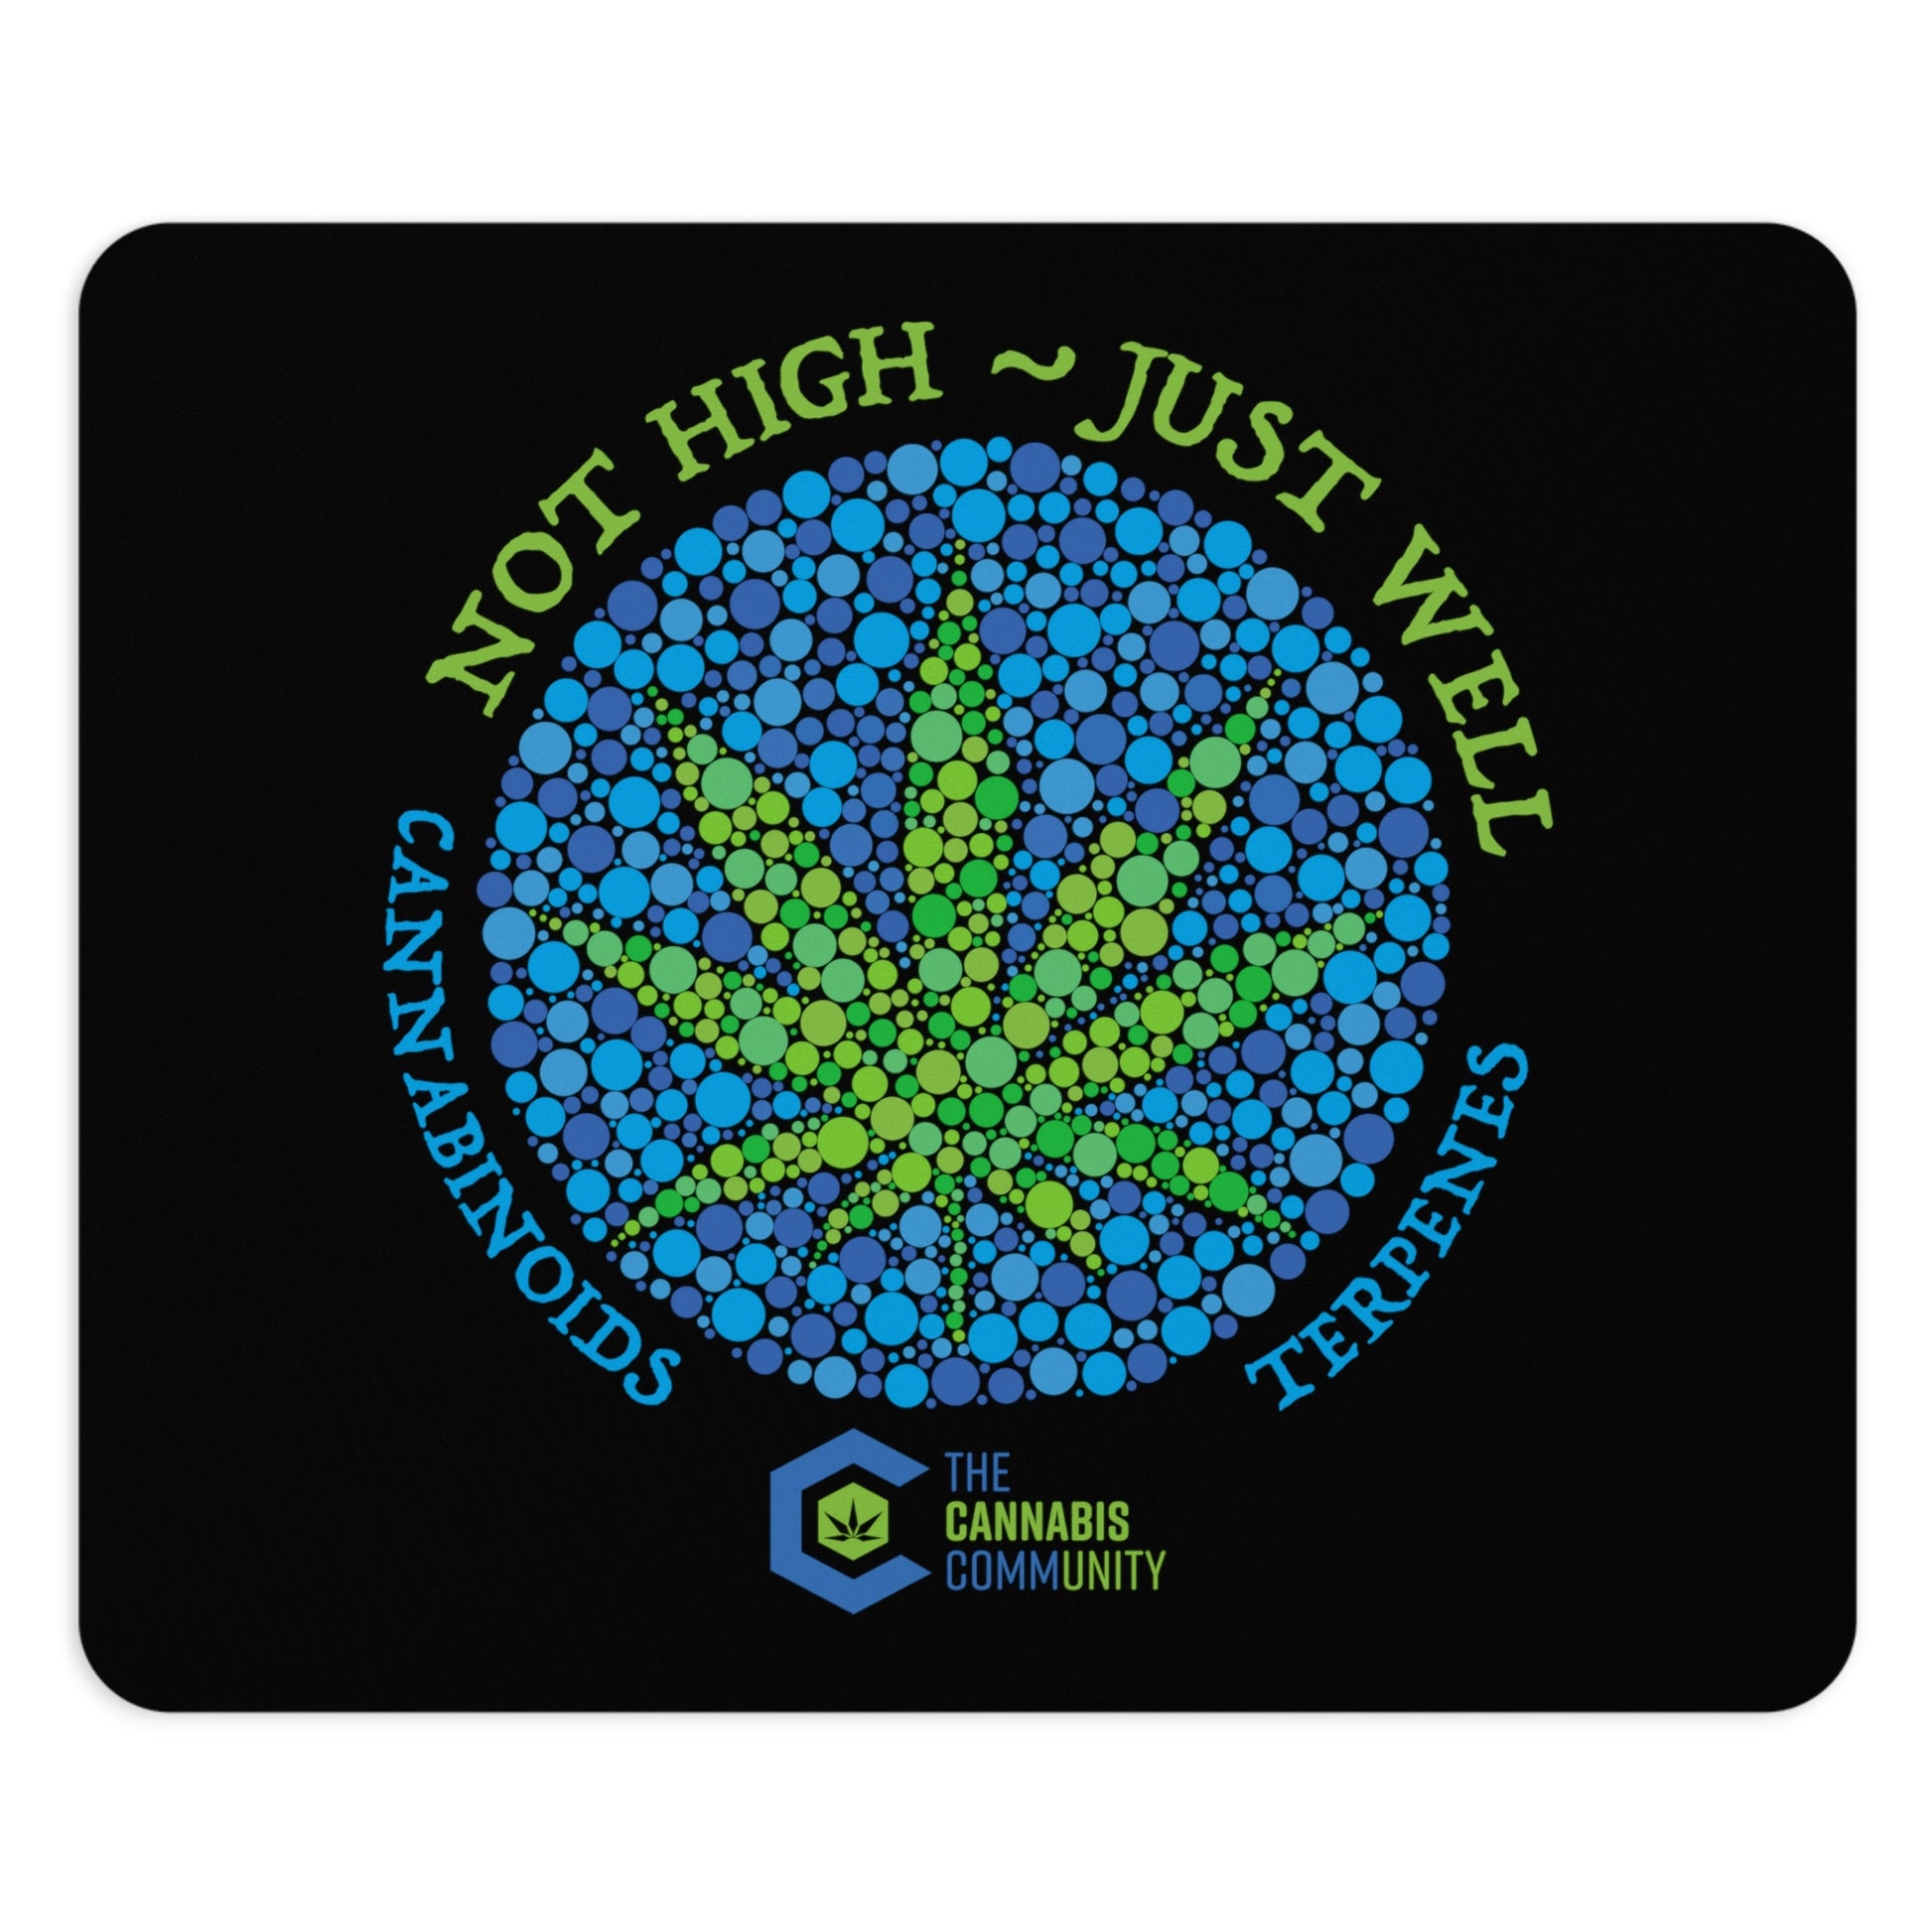 This Not High, Just Well Mouse Pad is creatively designed to appeal to the user with green weed leaf in the center.